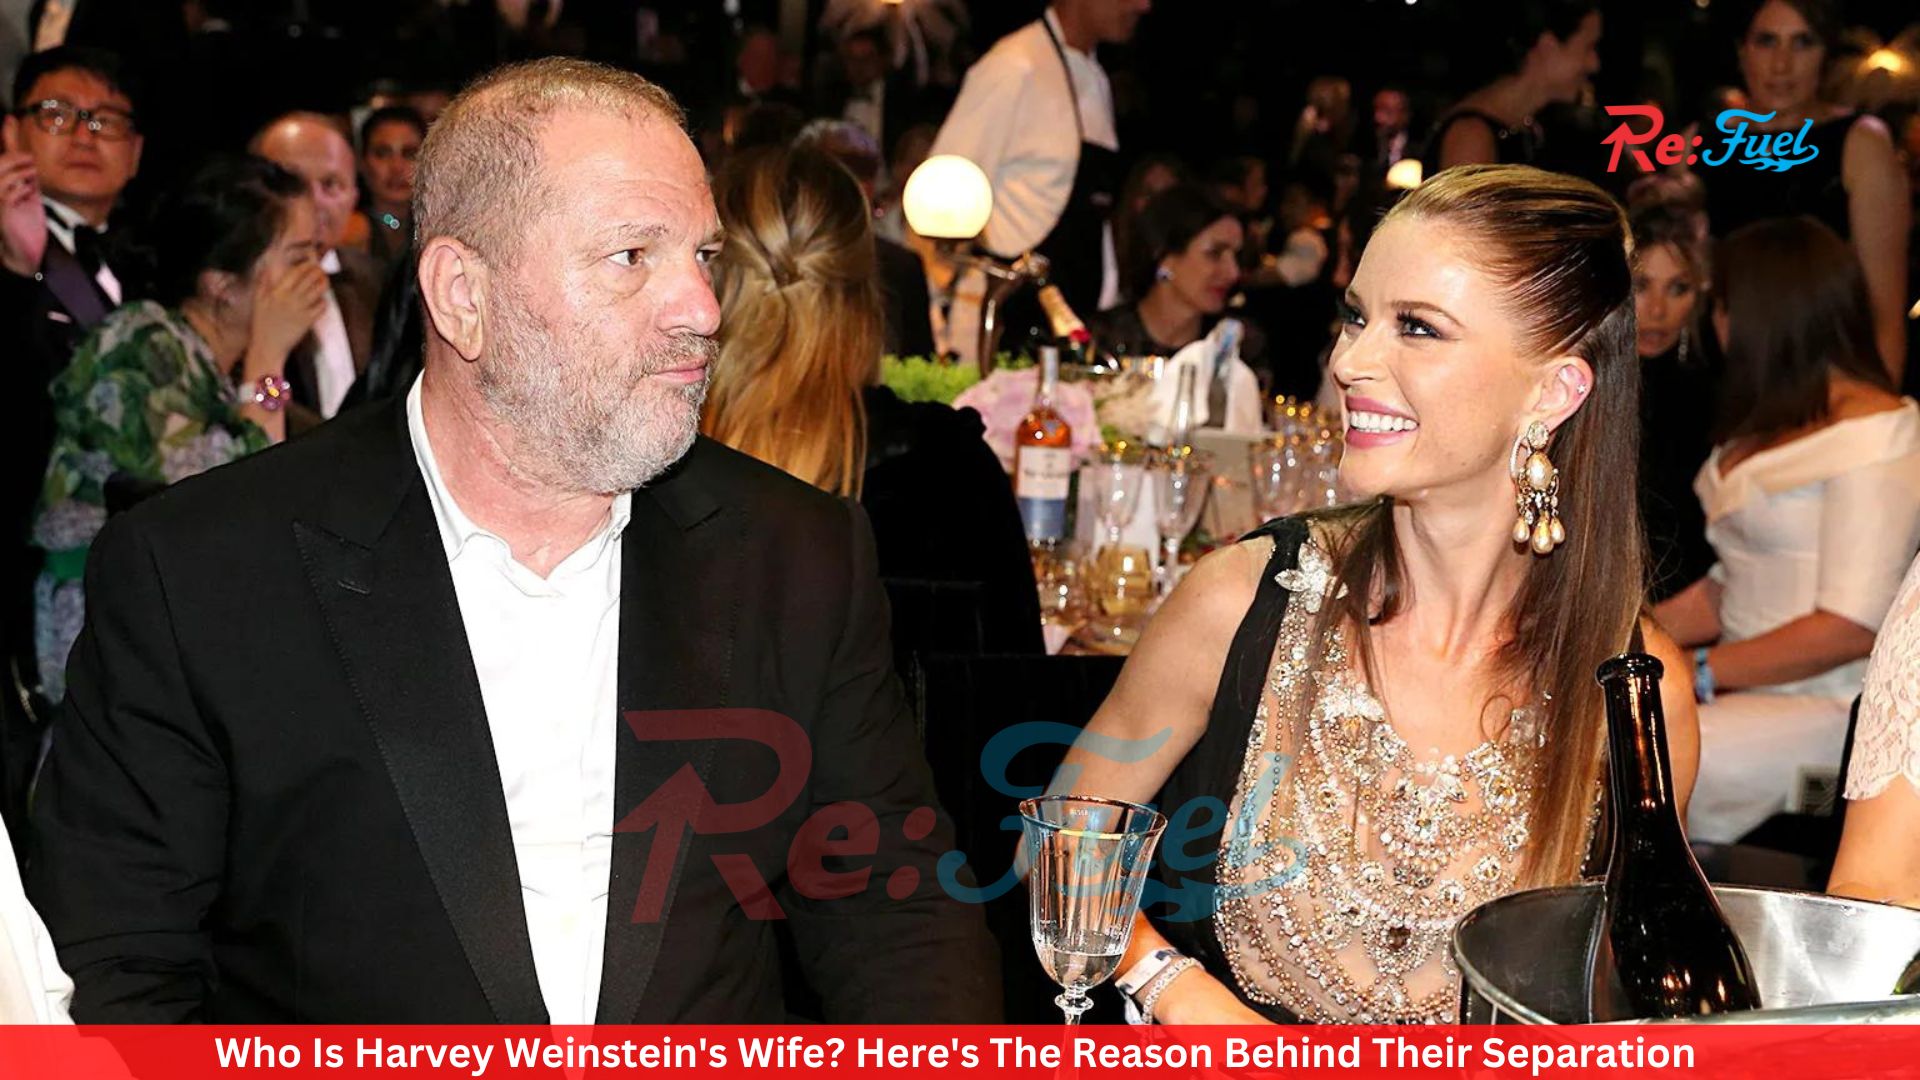 Who Is Harvey Weinstein's Wife? Here's The Reason Behind Their Separation